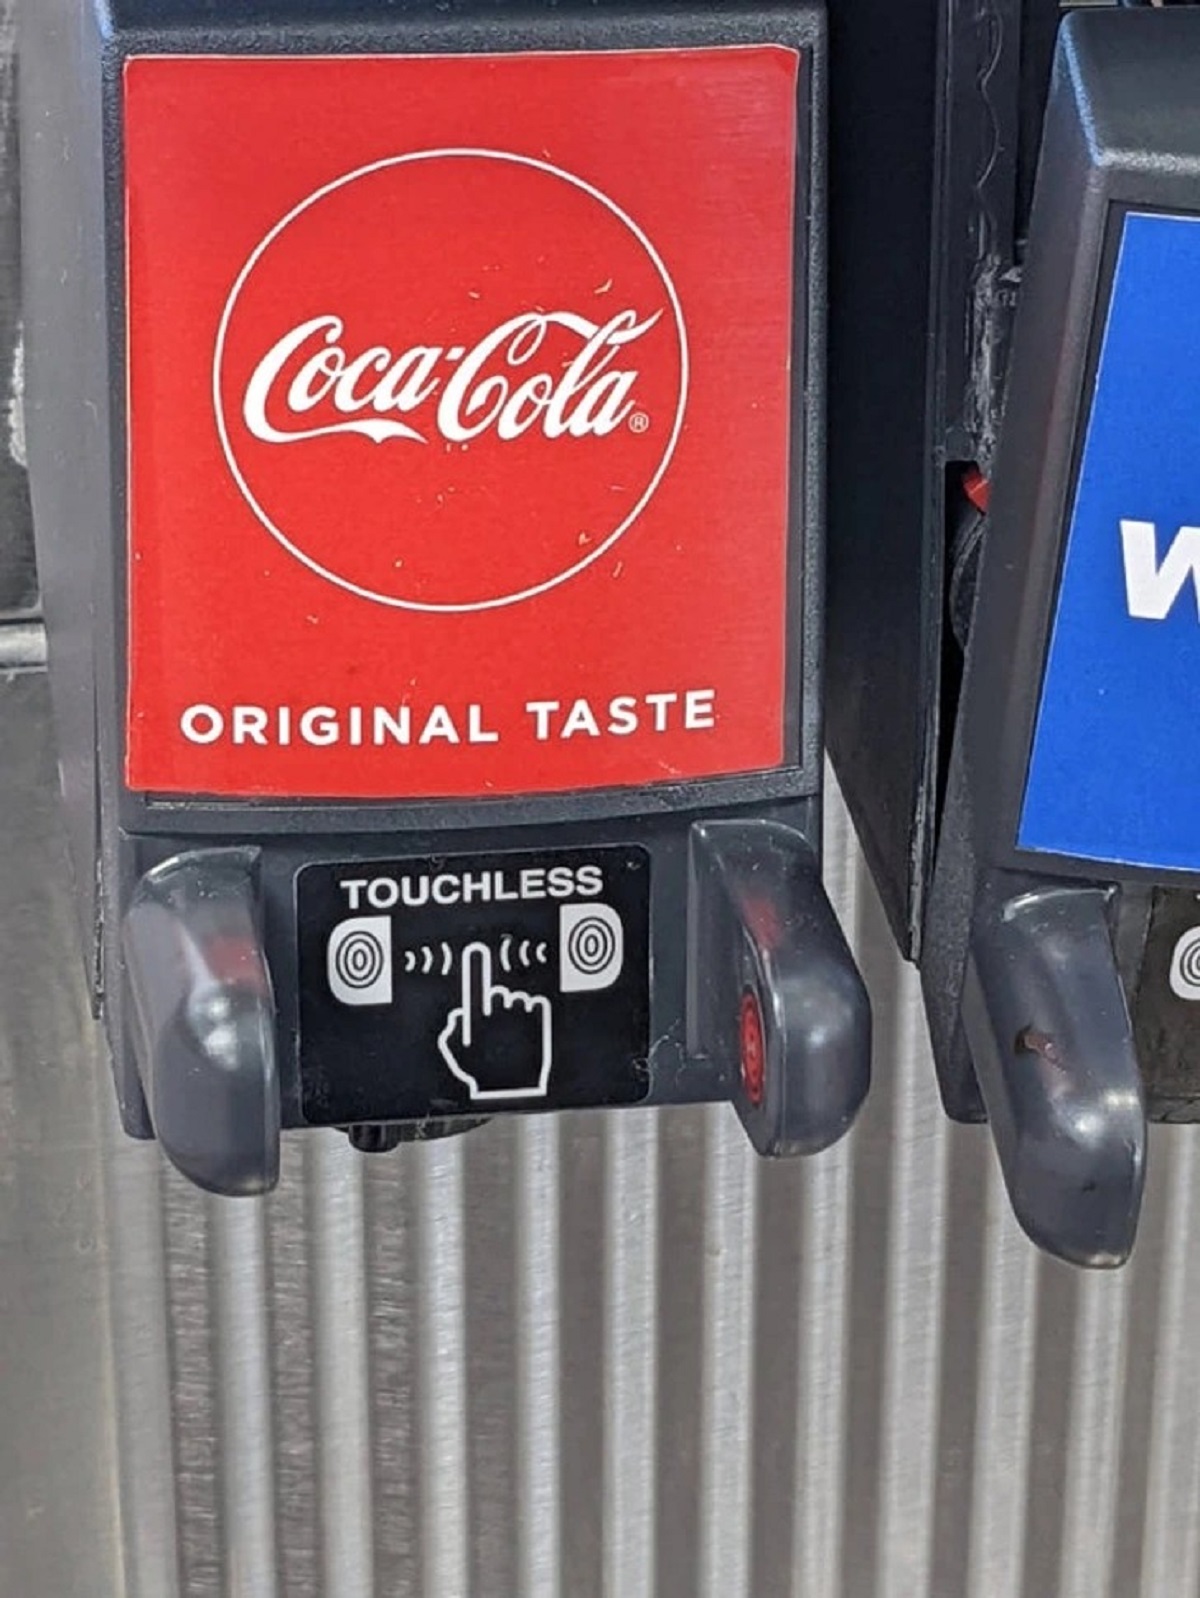 “A burger place near me has installed contactless soda.”